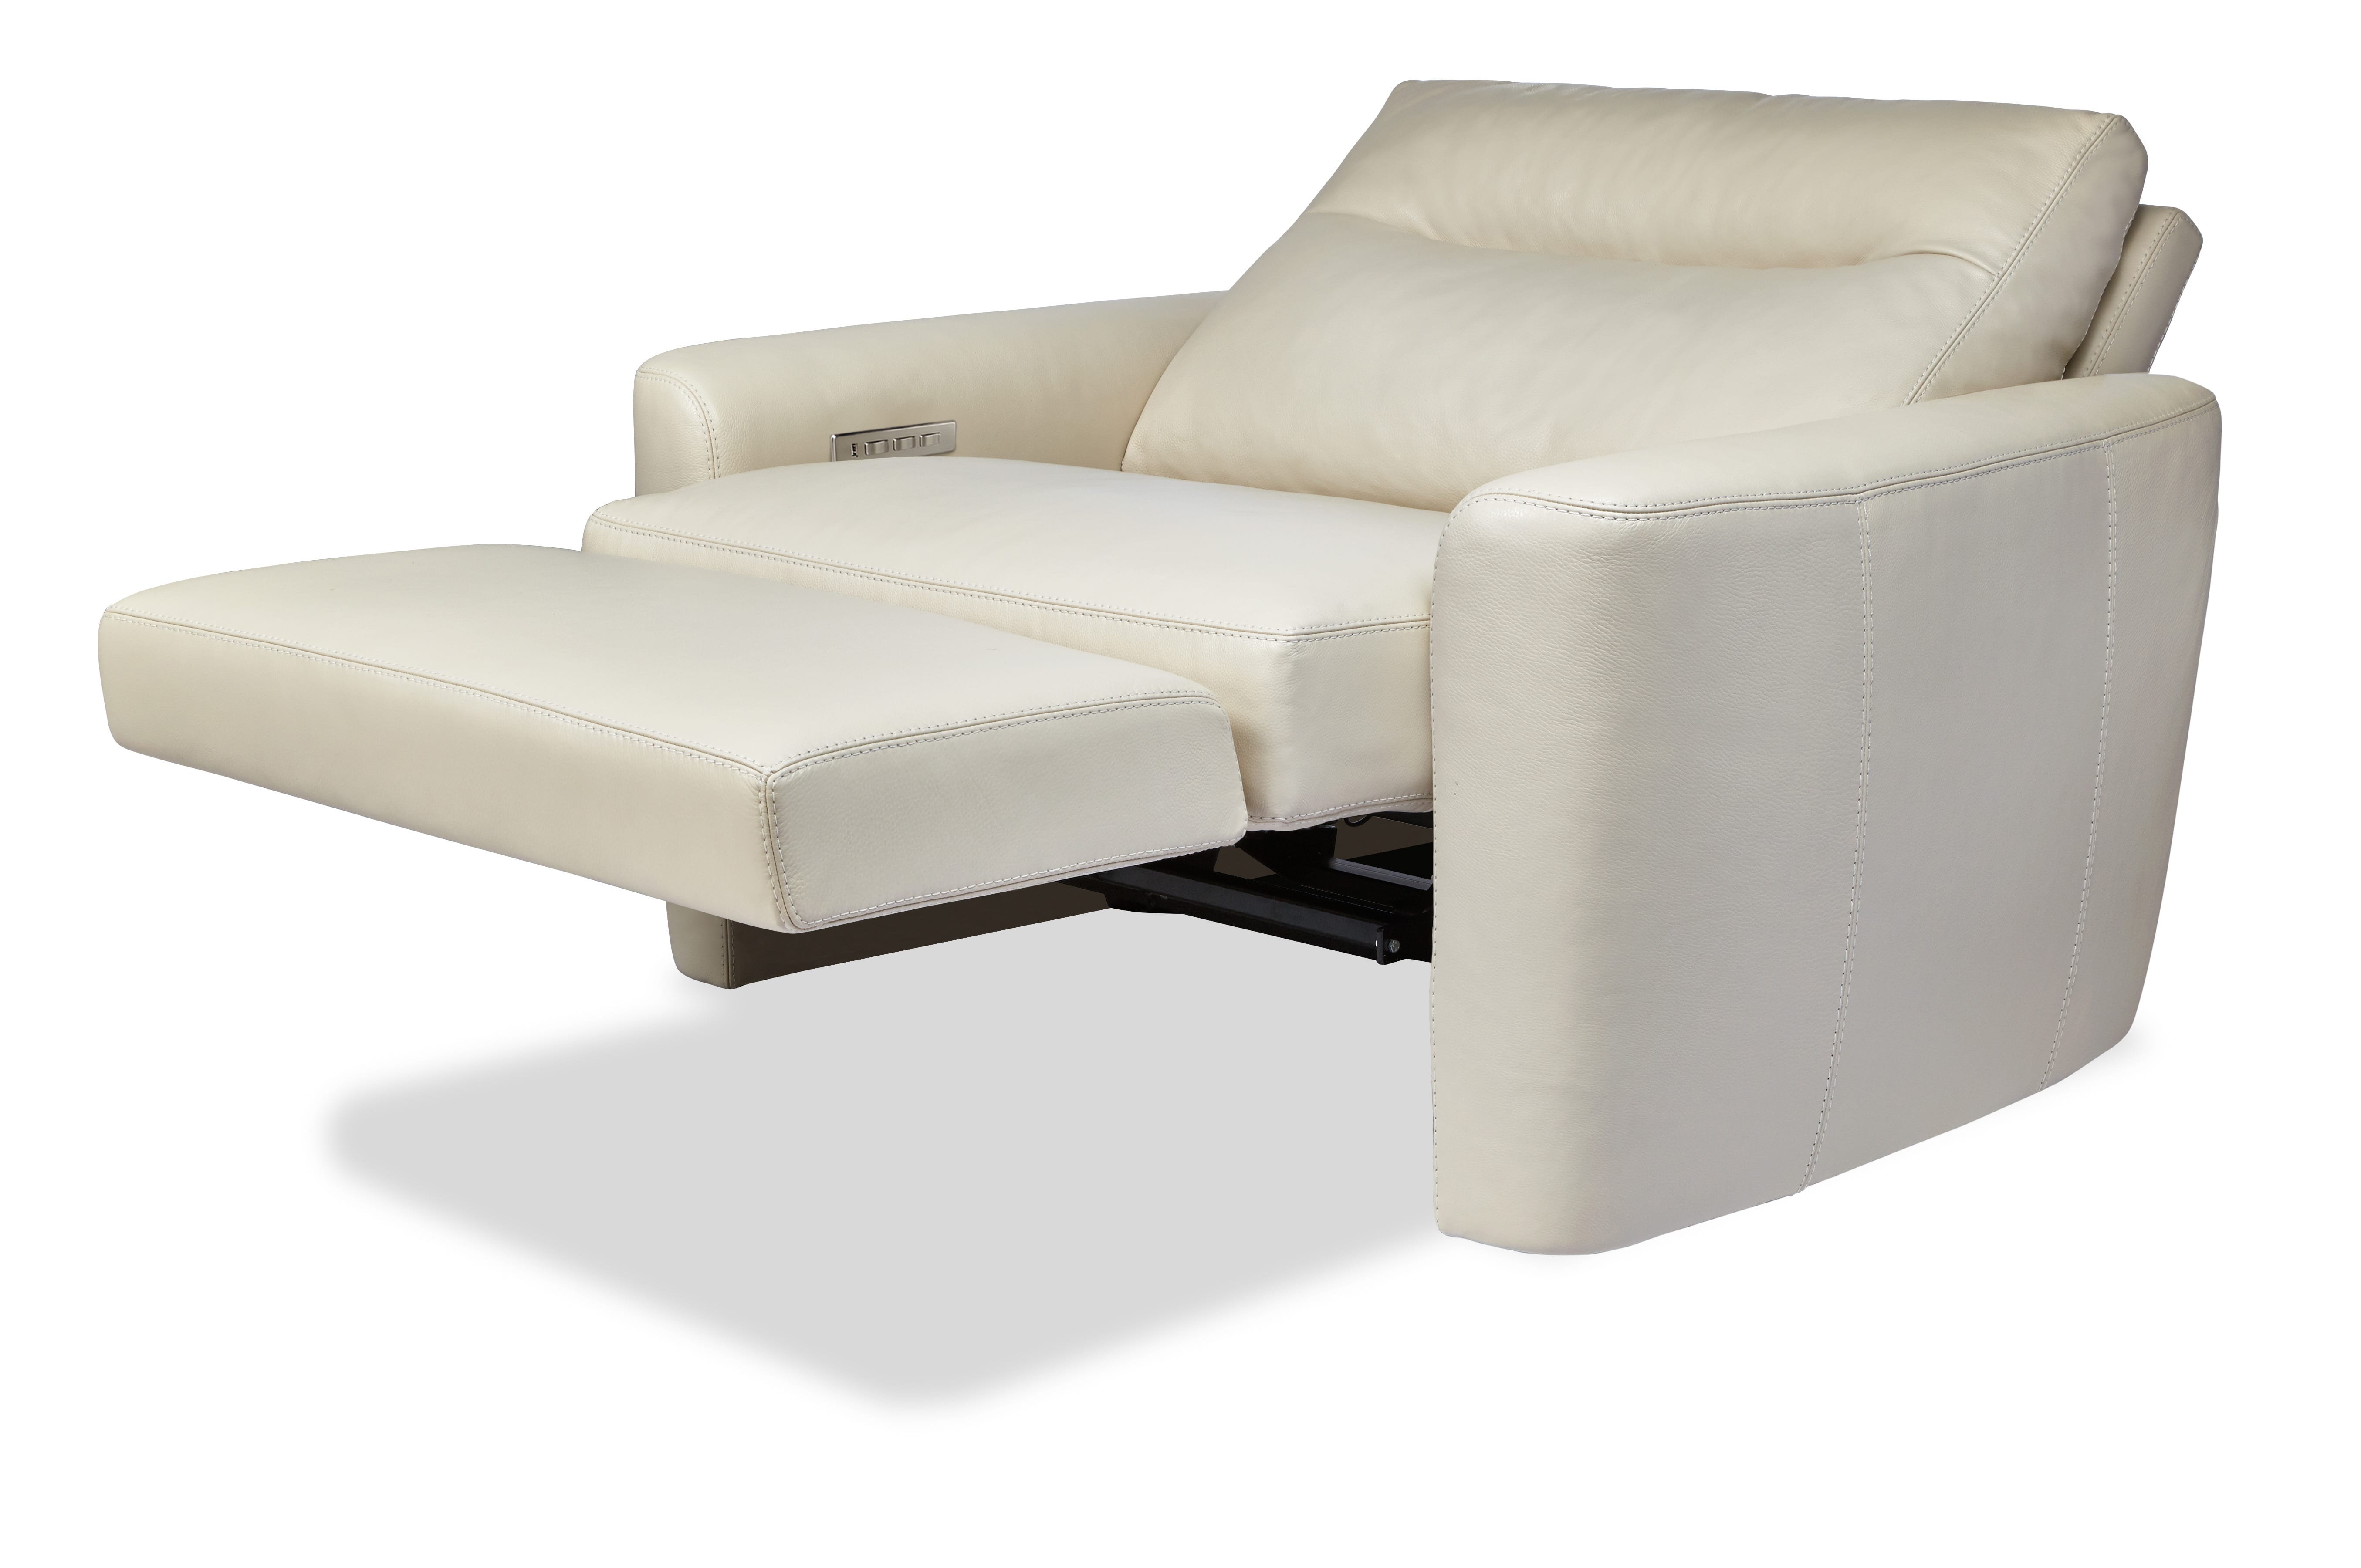 American leather recliner price